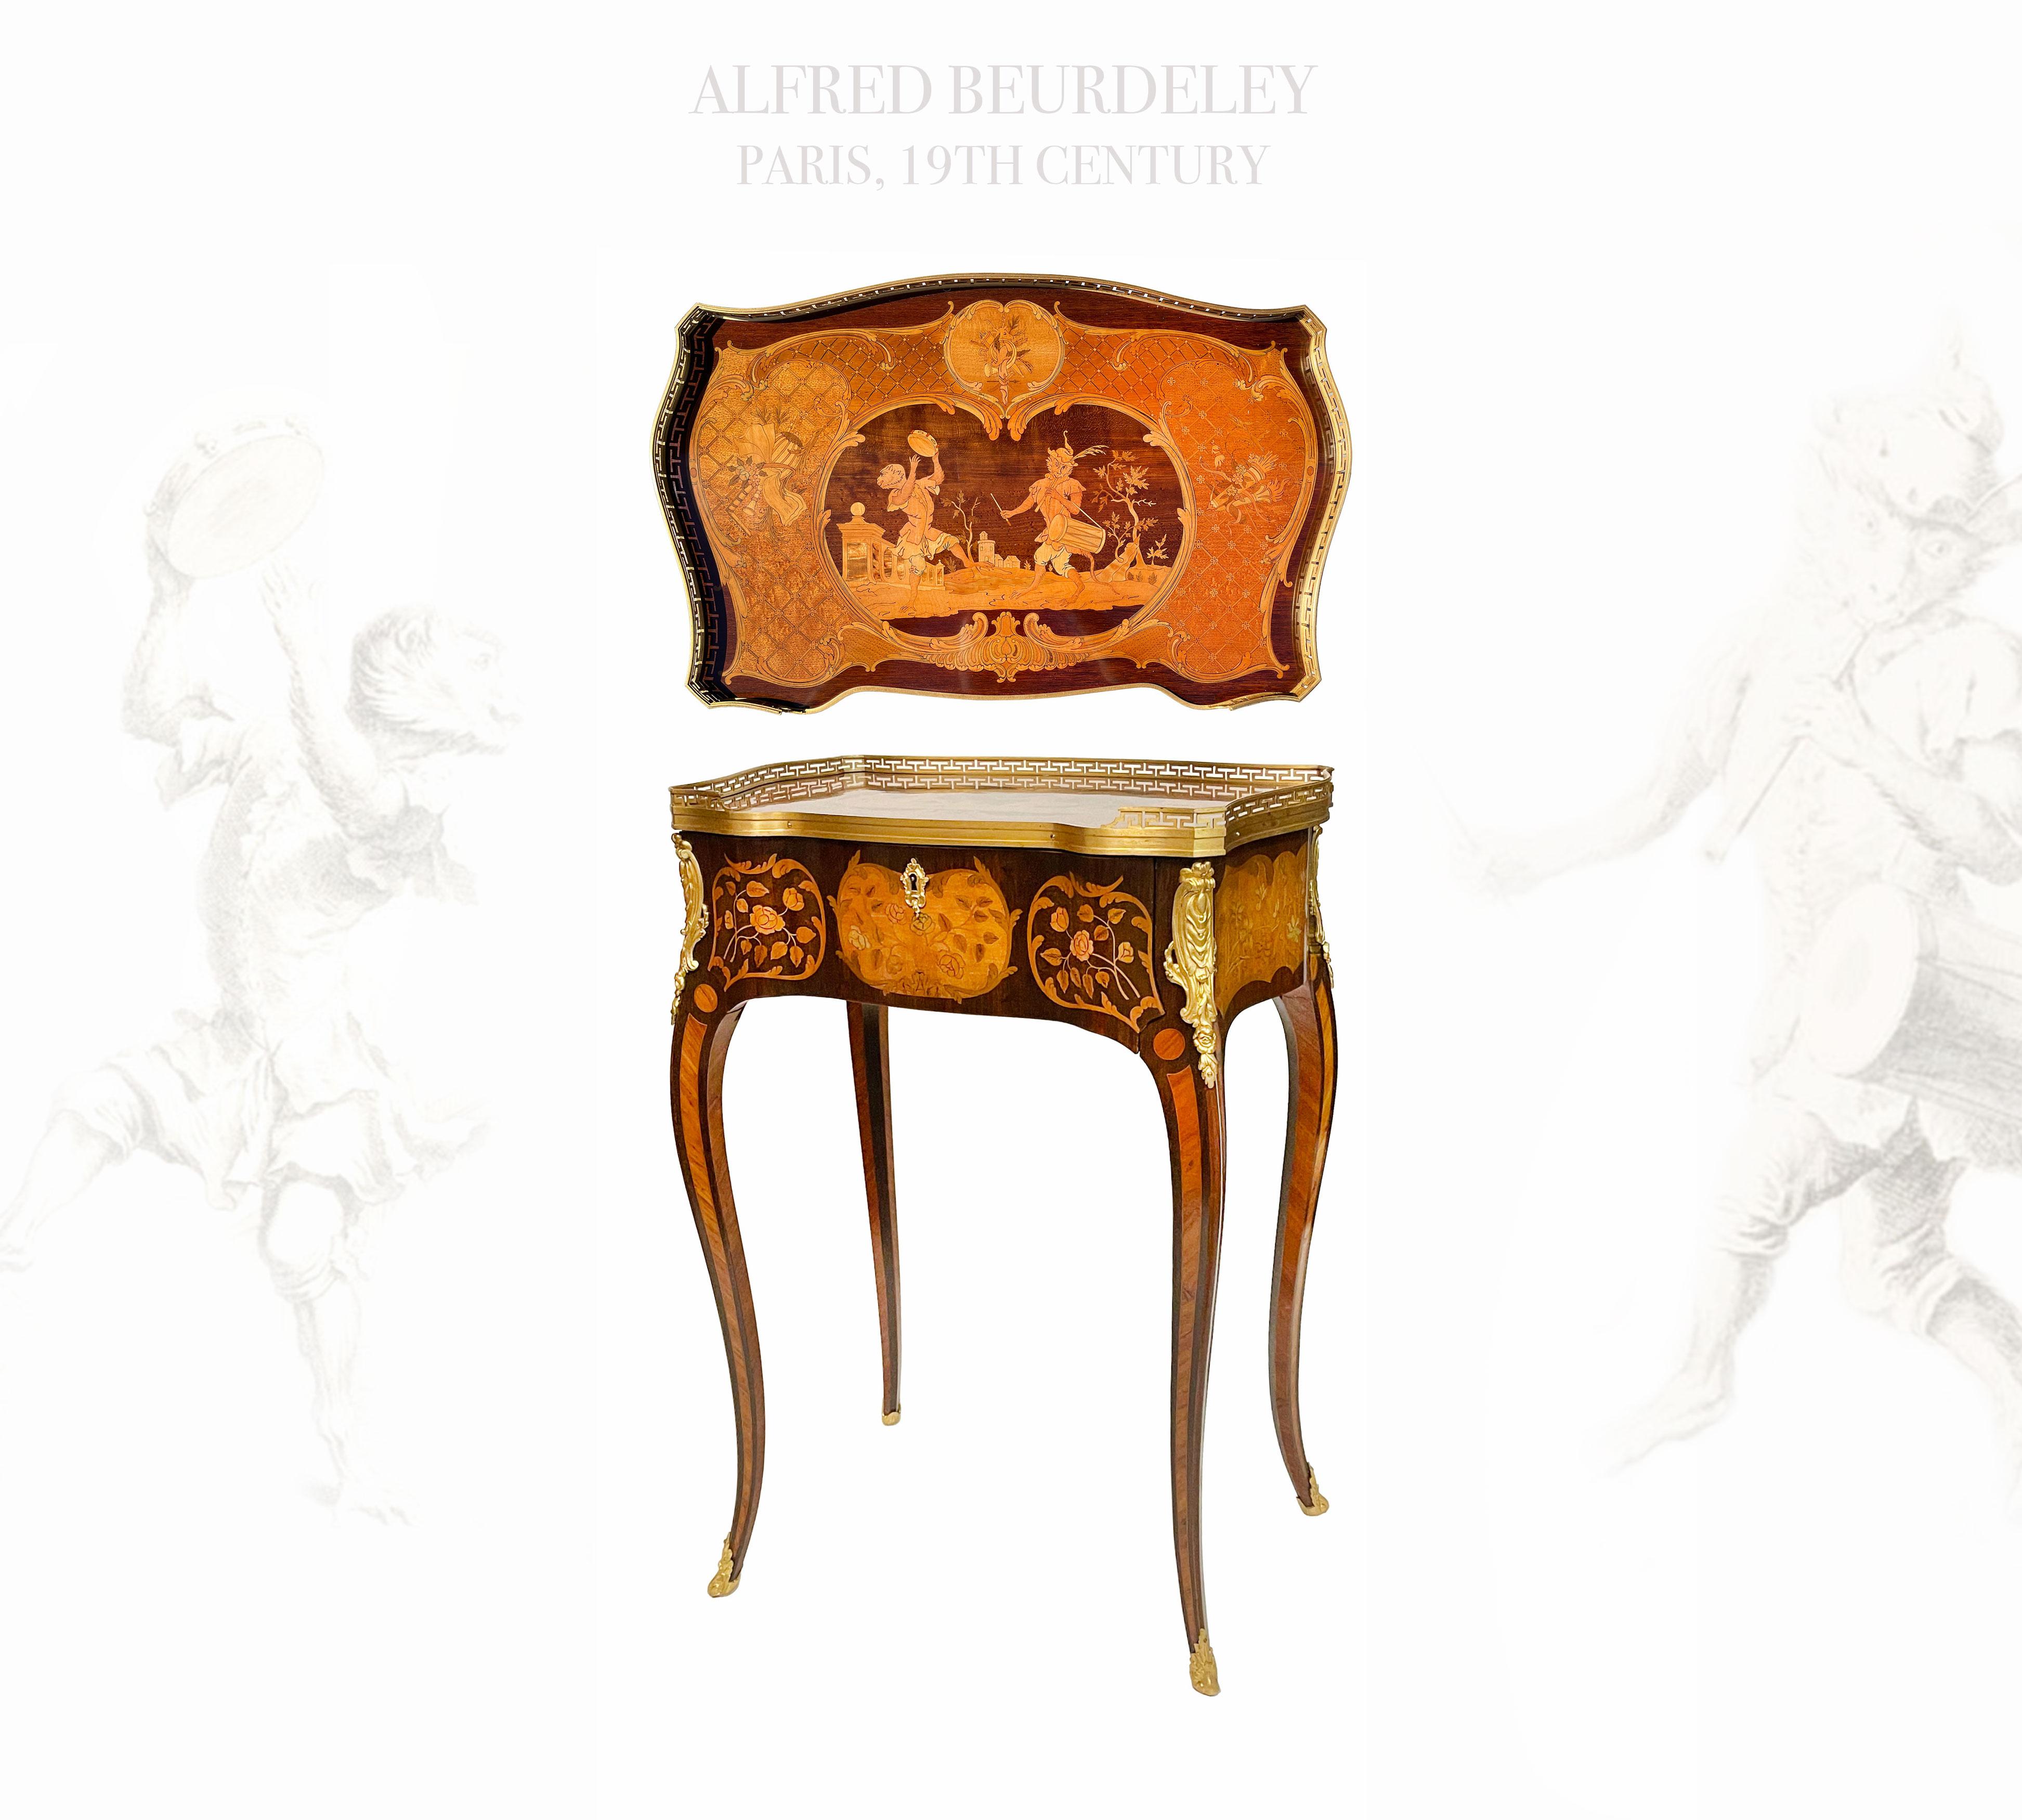 A Louis XV style ormolu-mounted tulipwood, amaranth, satinwood and marquetry lady's writing table
By Alfred Beurdeley, Paris, last quarter 19th century 
Of serpentine outline, the sliding top inlaid with monkeys, dancing and playing musical